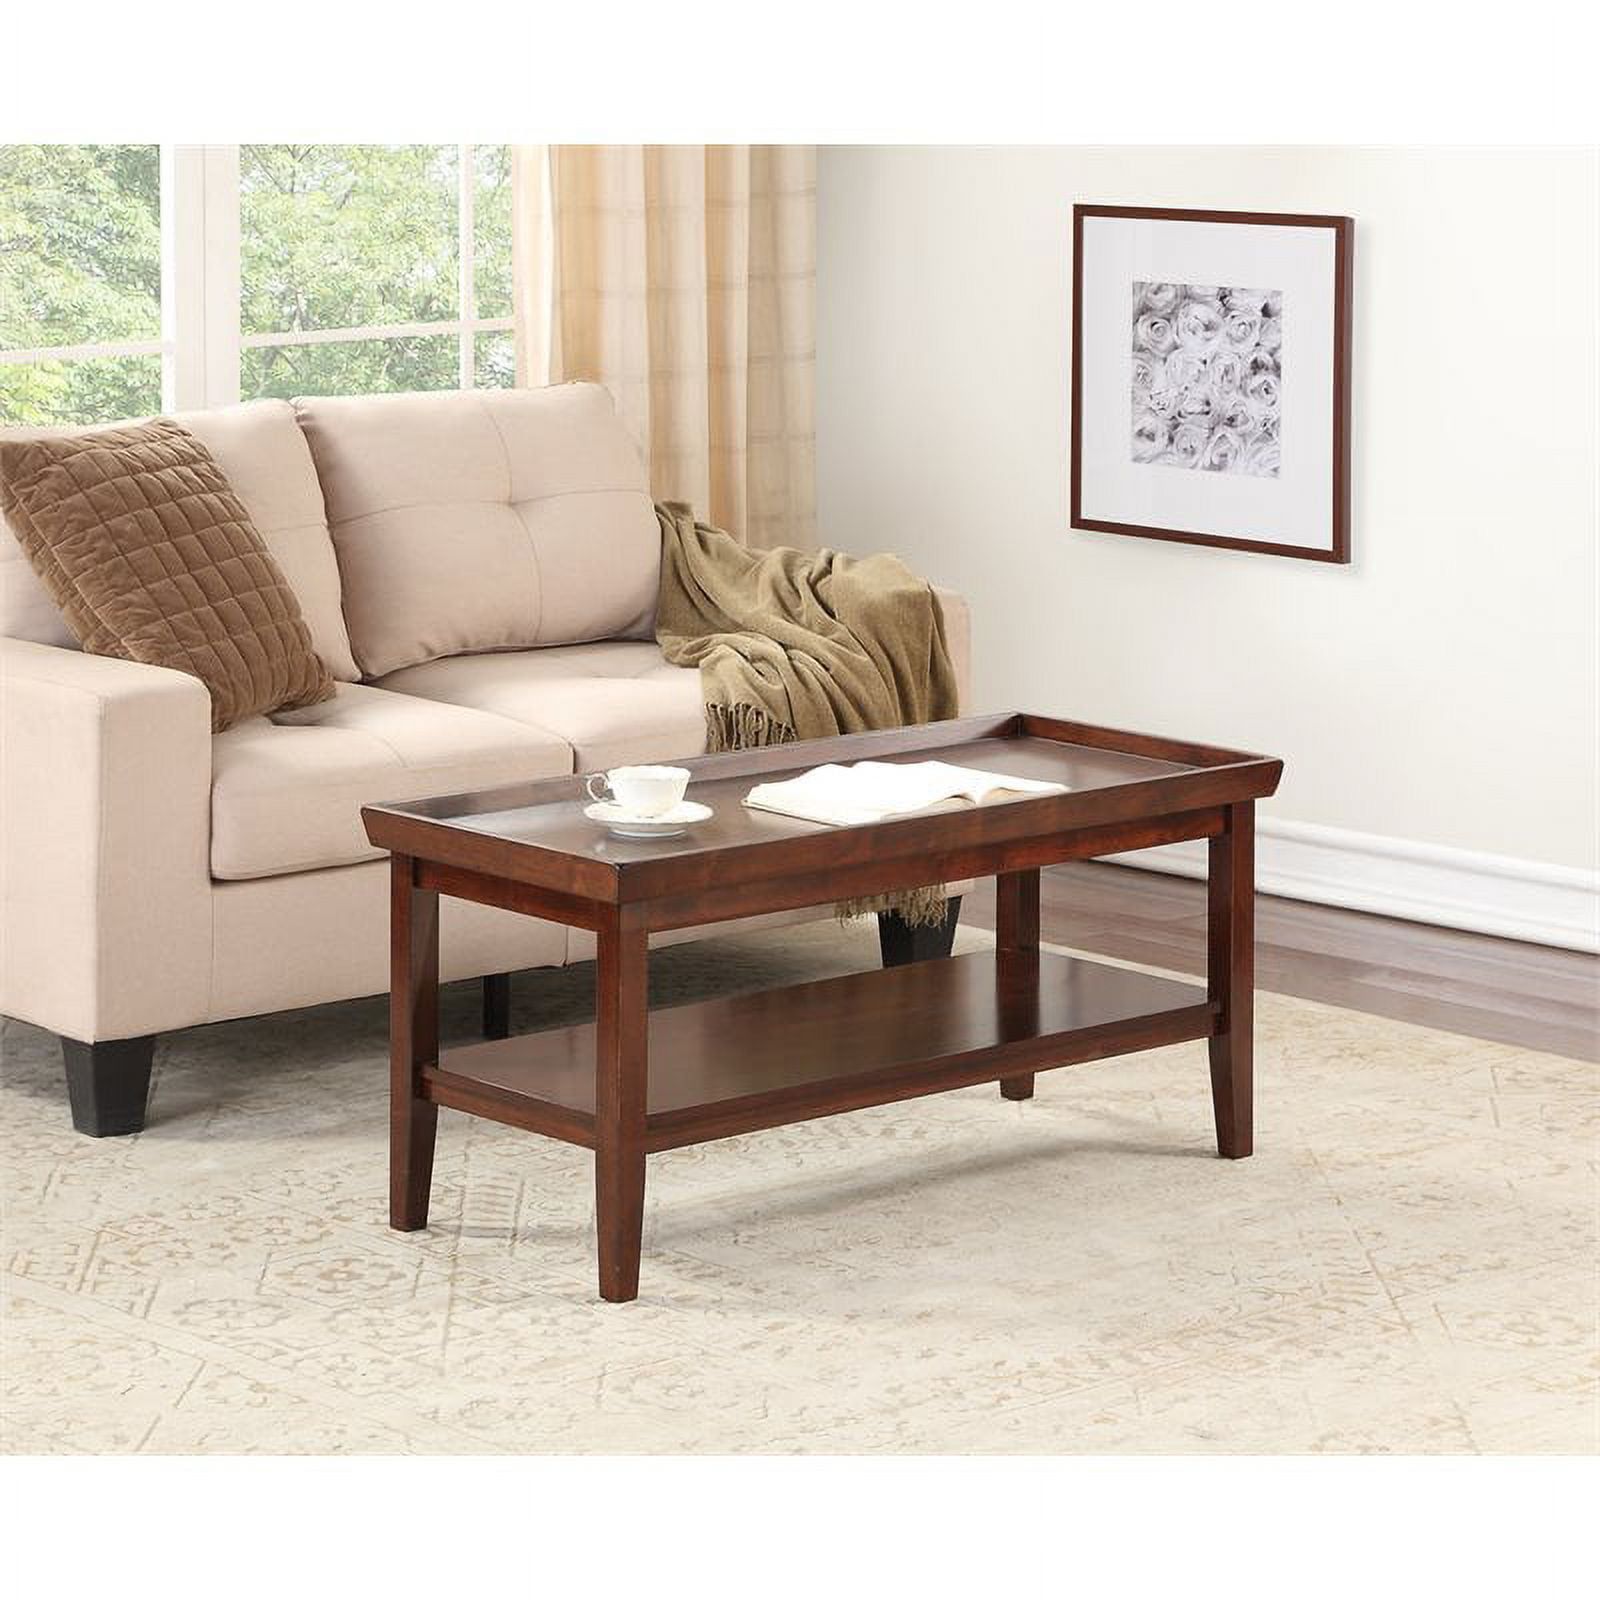 Pemberly Row Coffee Table In Espresso Wood Finish – Walmart Inside Espresso Wood Finish Coffee Tables (View 11 of 15)